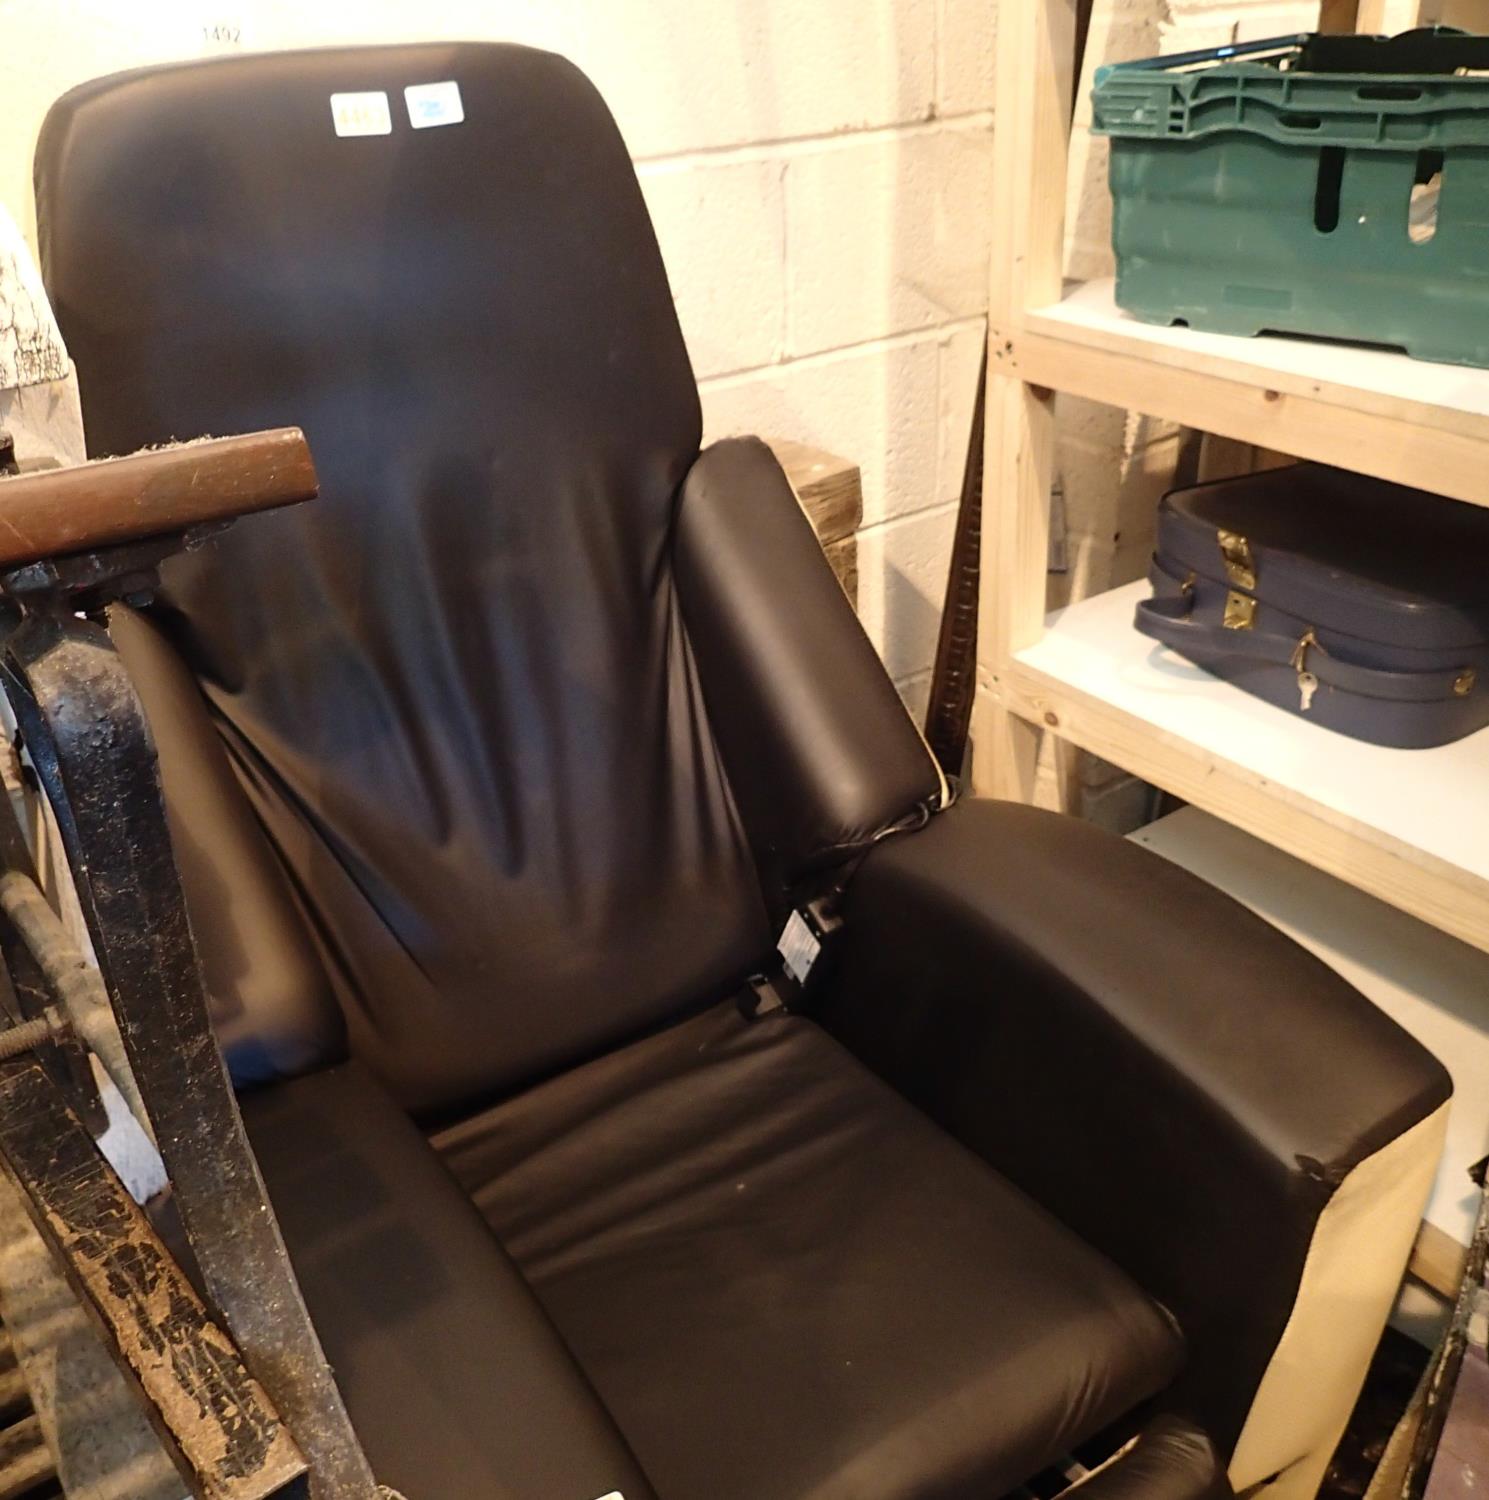 Large black electric chair on castors. Not available for in-house P&P, contact Paul O'Hea at